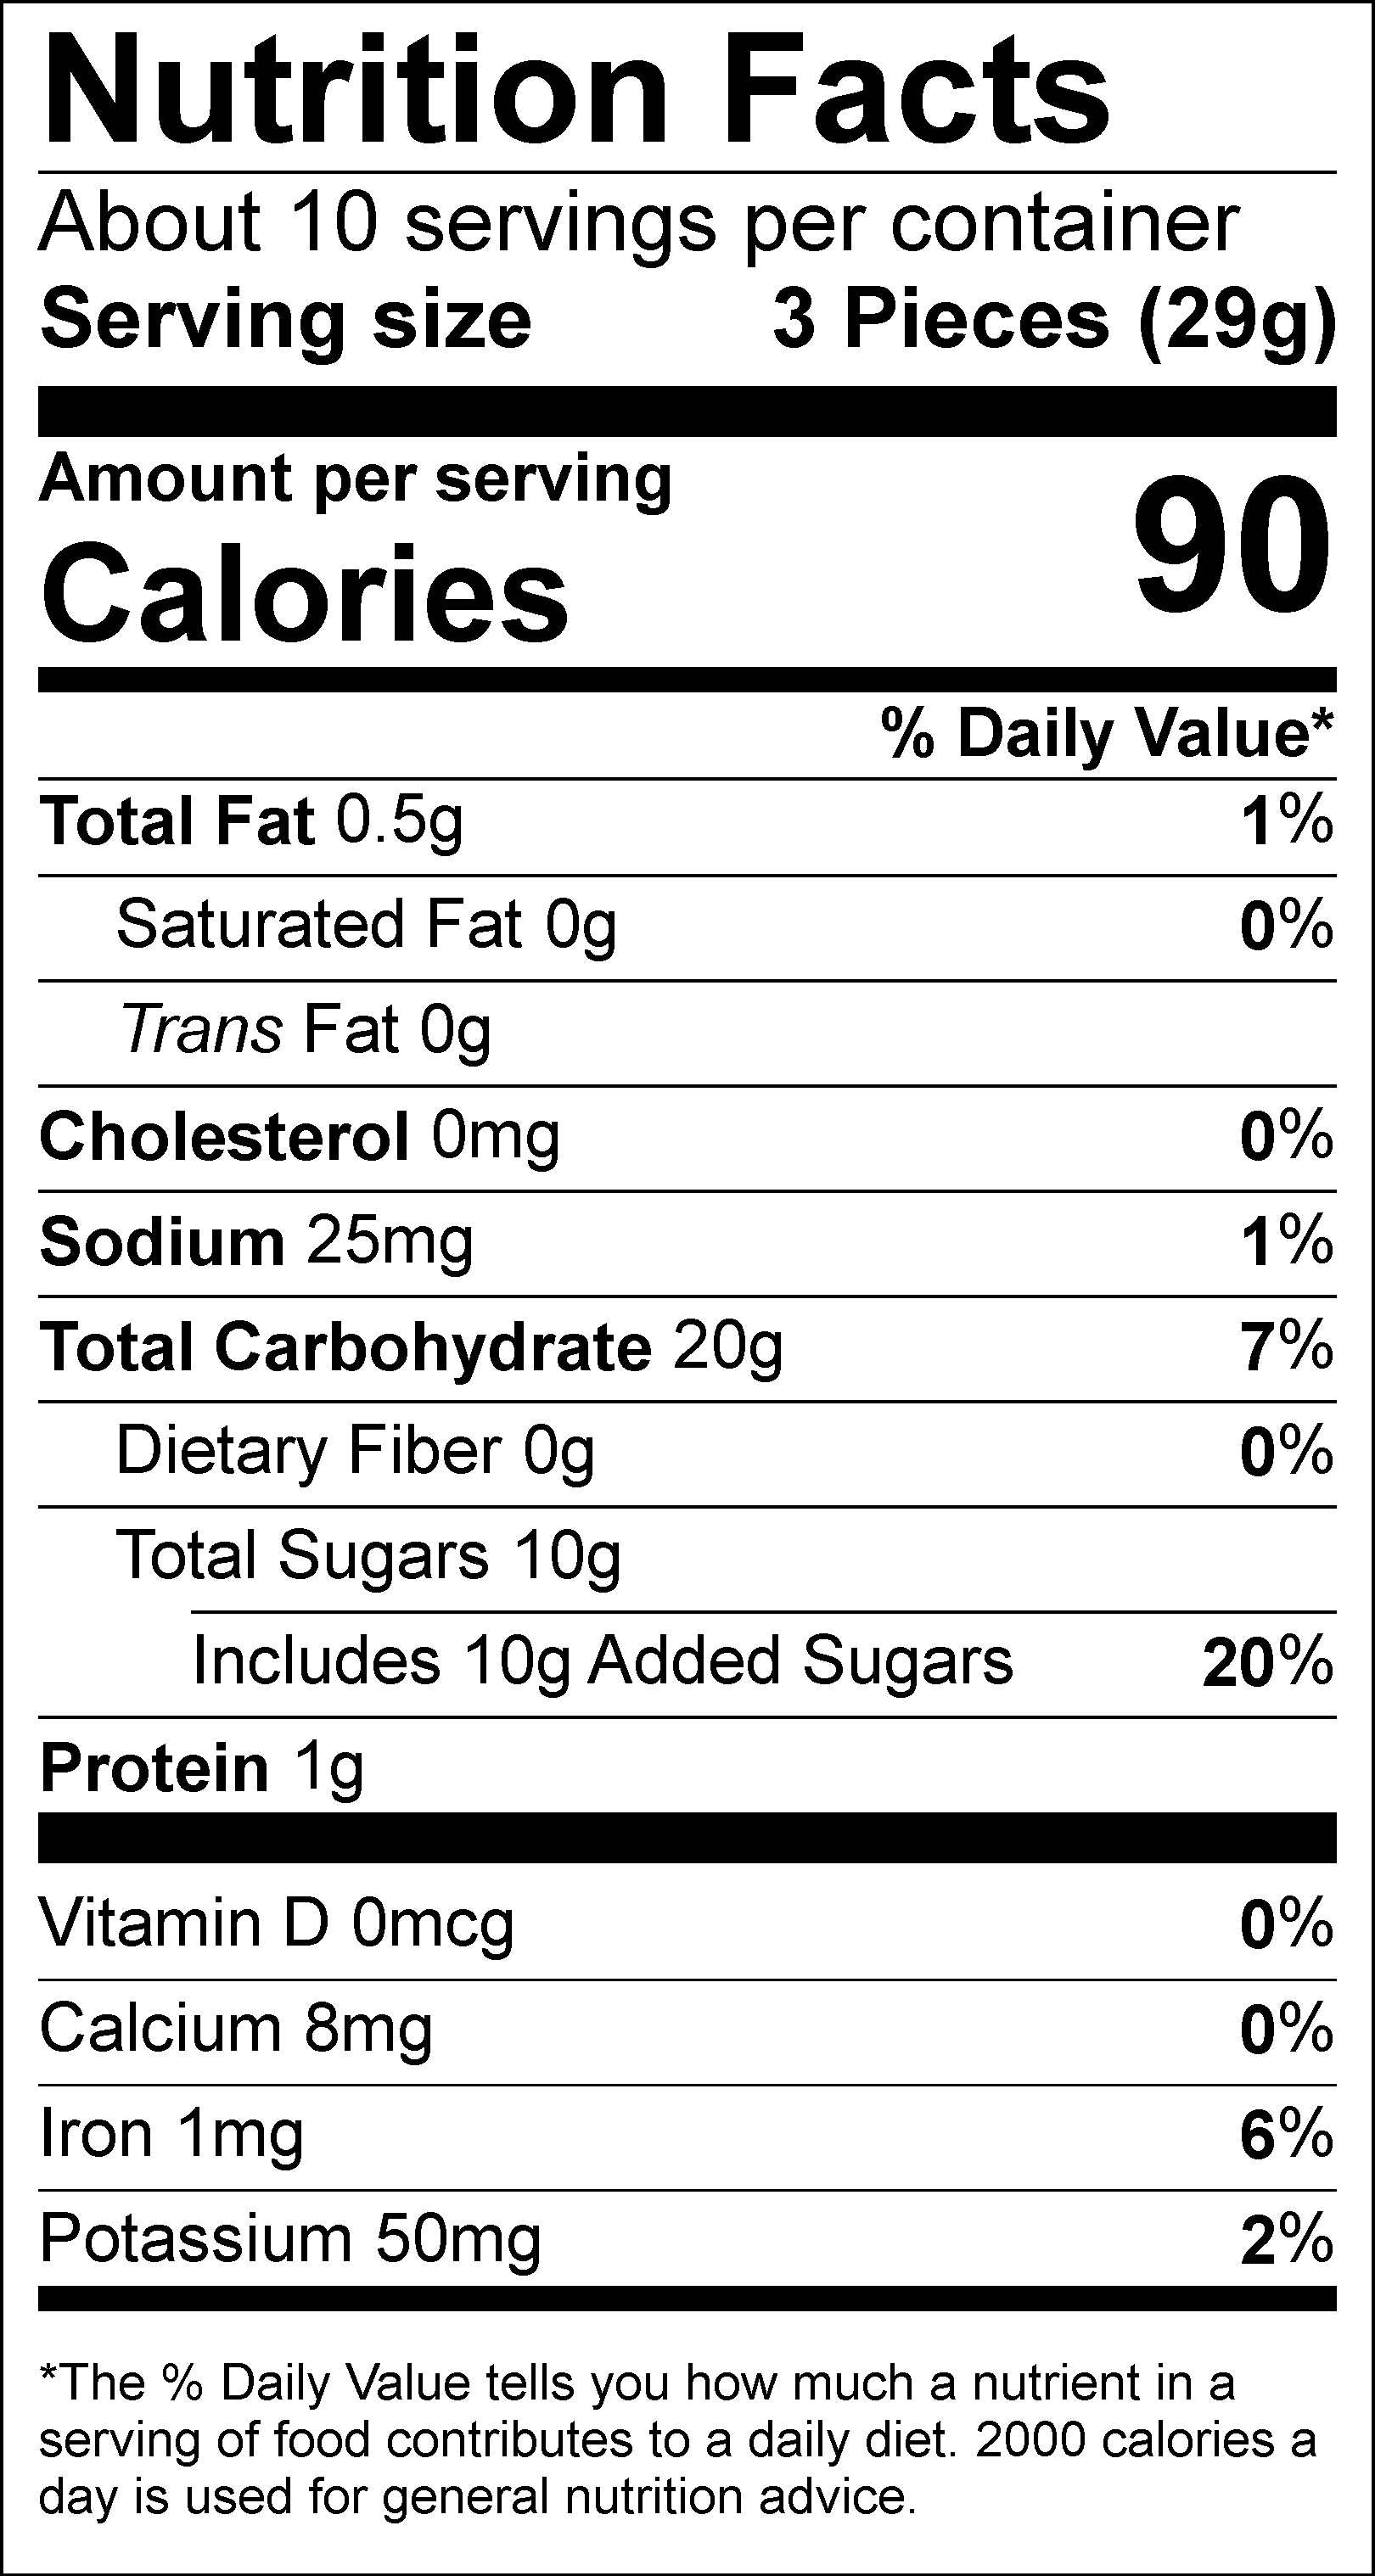 Classic Black Licorice Nutrition Facts